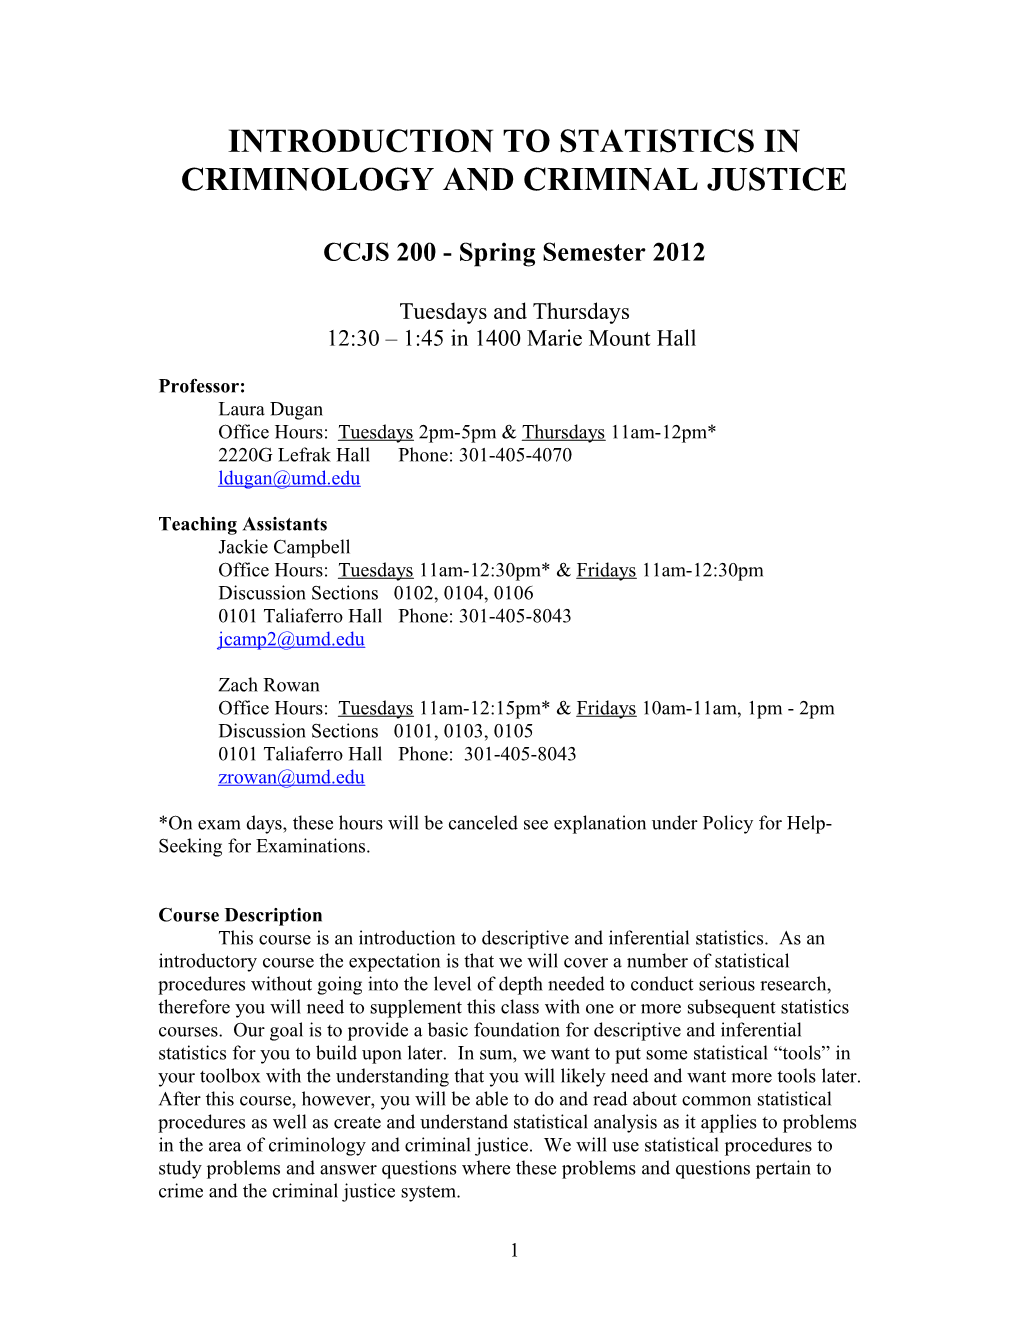 Introduction To Statistics In Criminology And Criminal Justice